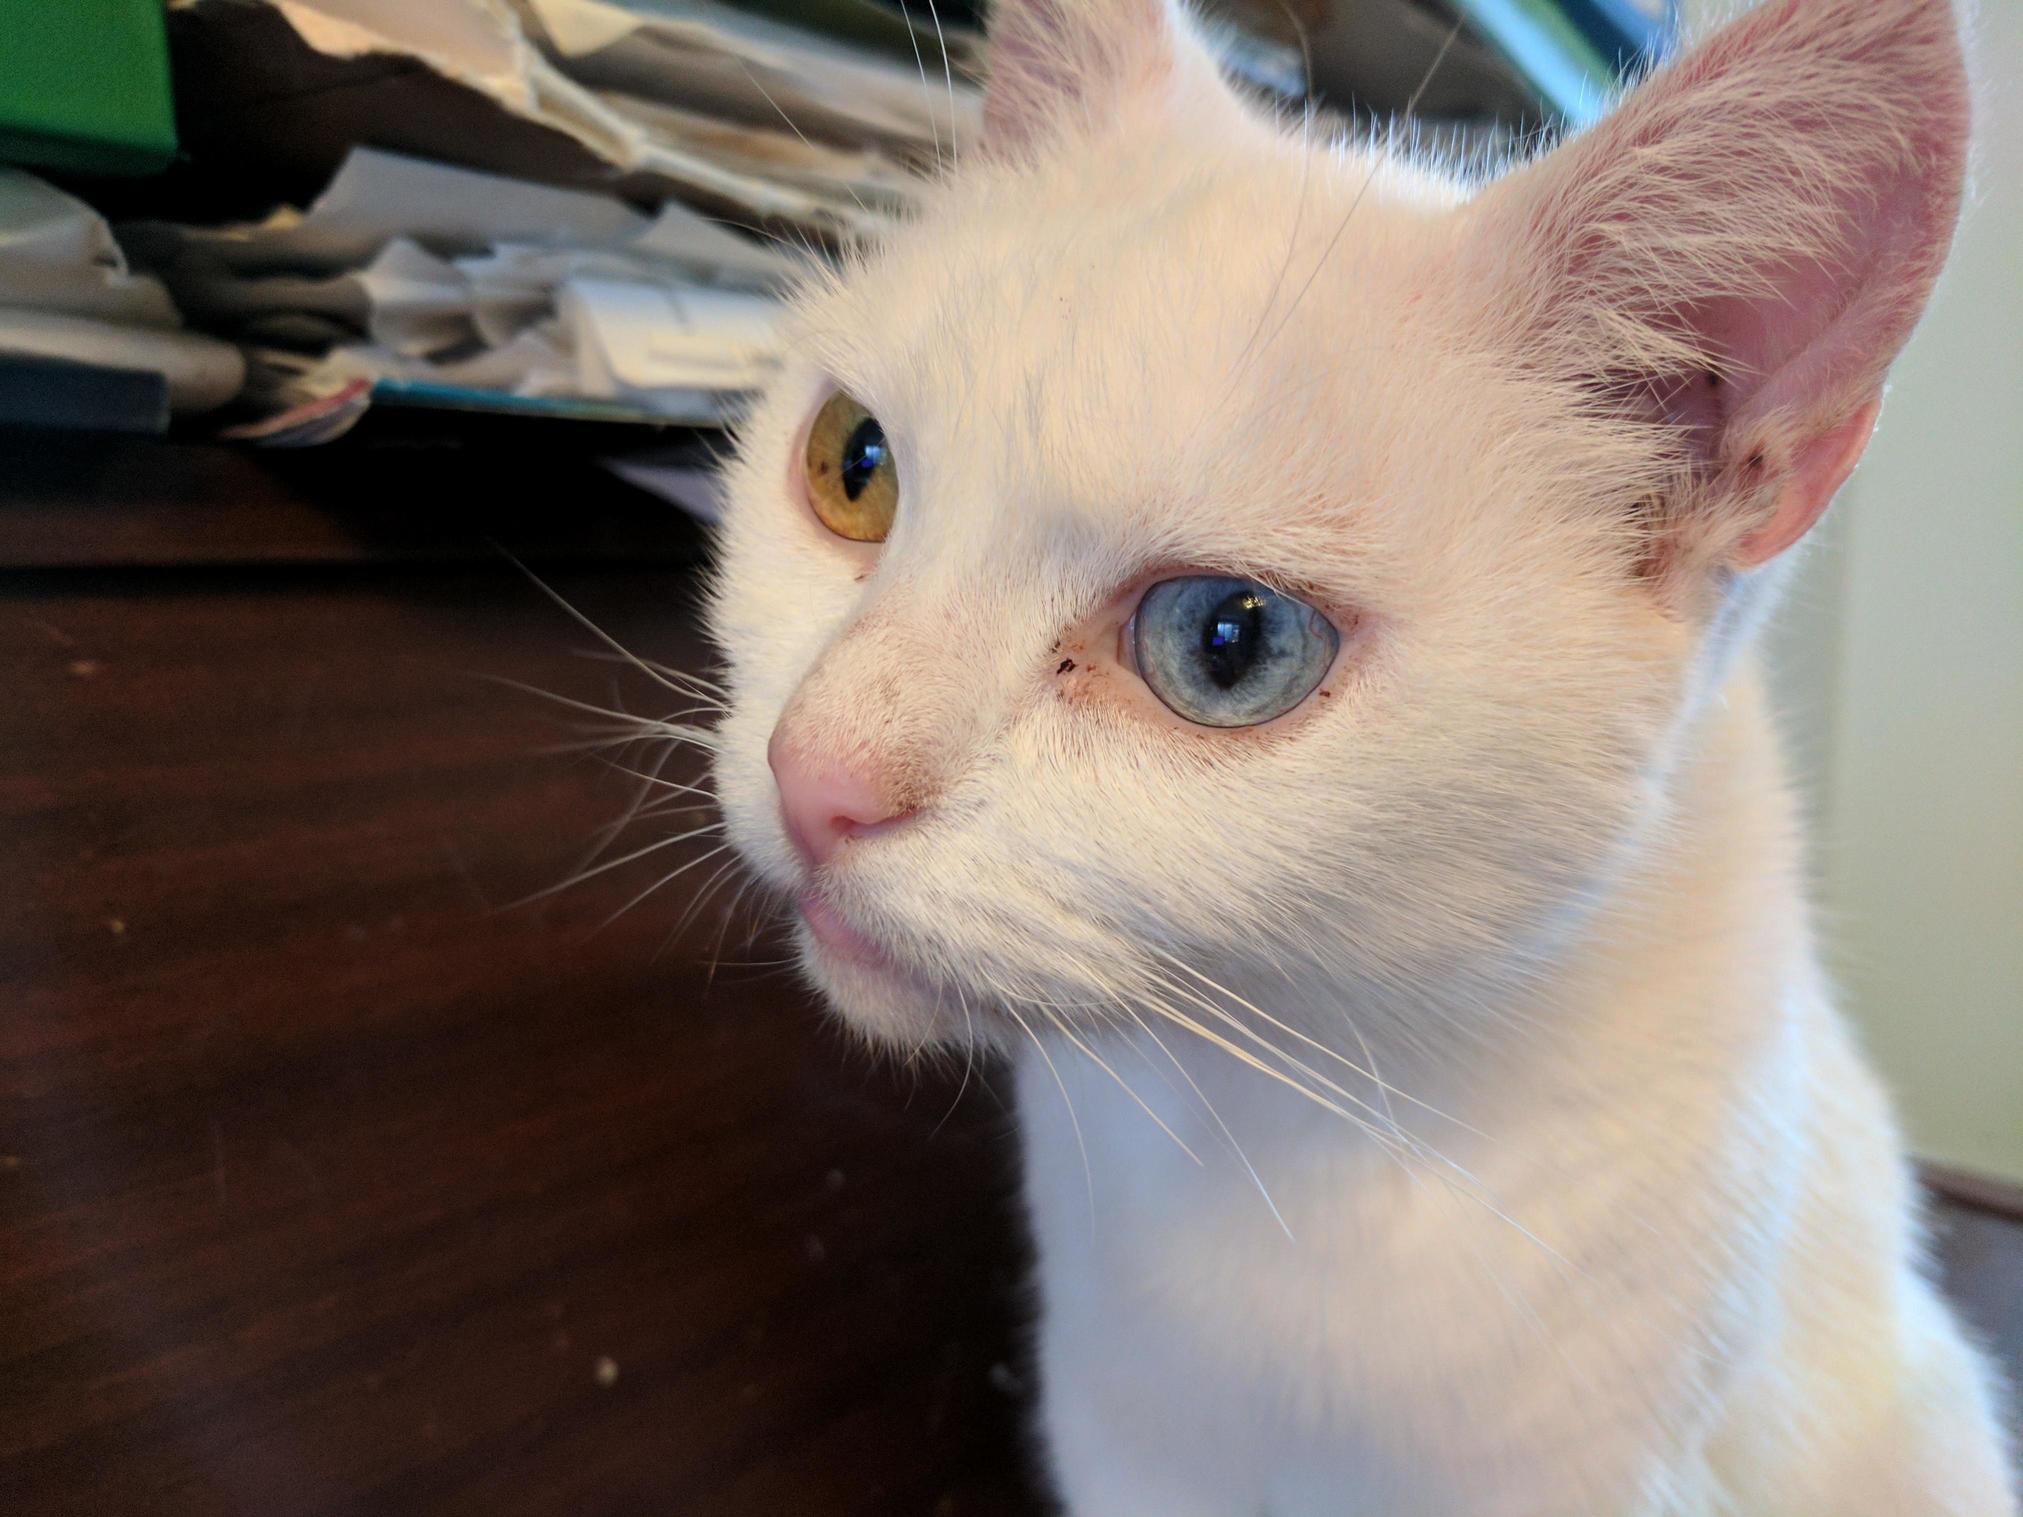 This is snowy. she has pretty eyes.